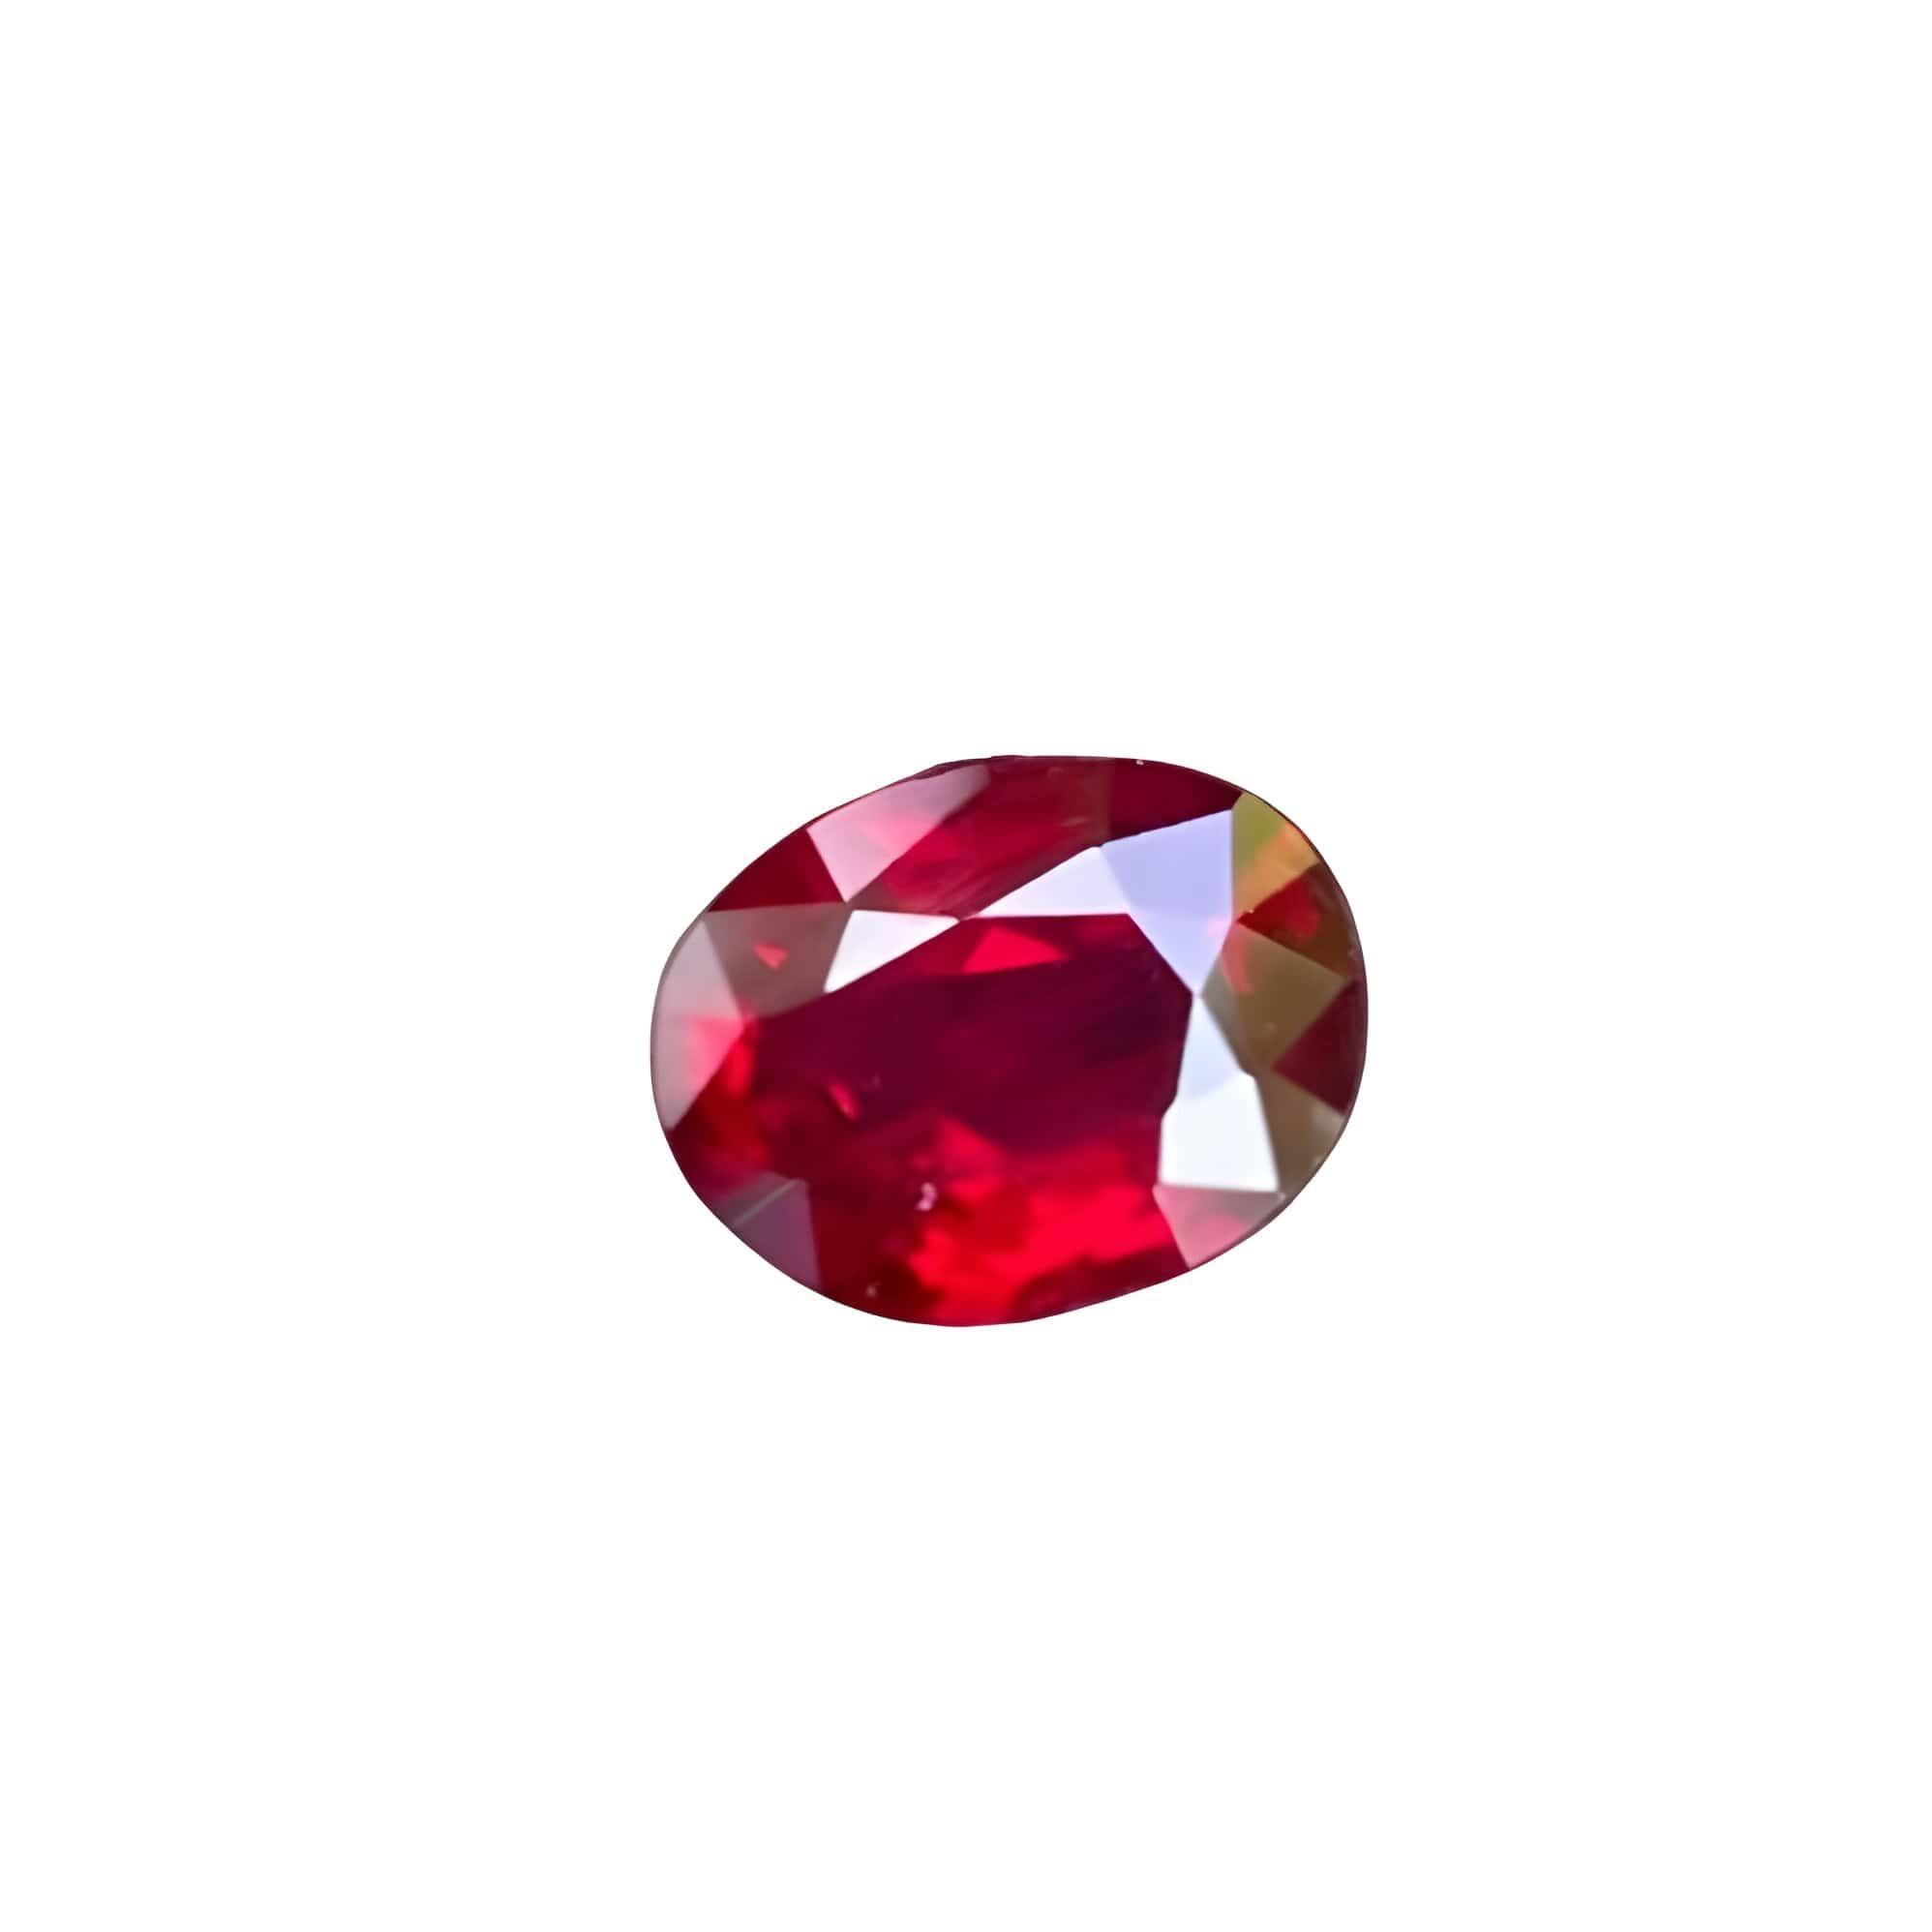 Oval Cut 0.80 Carats Oval Shaped Natural Mozambique Loose Red Ruby Gemstone VVS Clarity For Sale